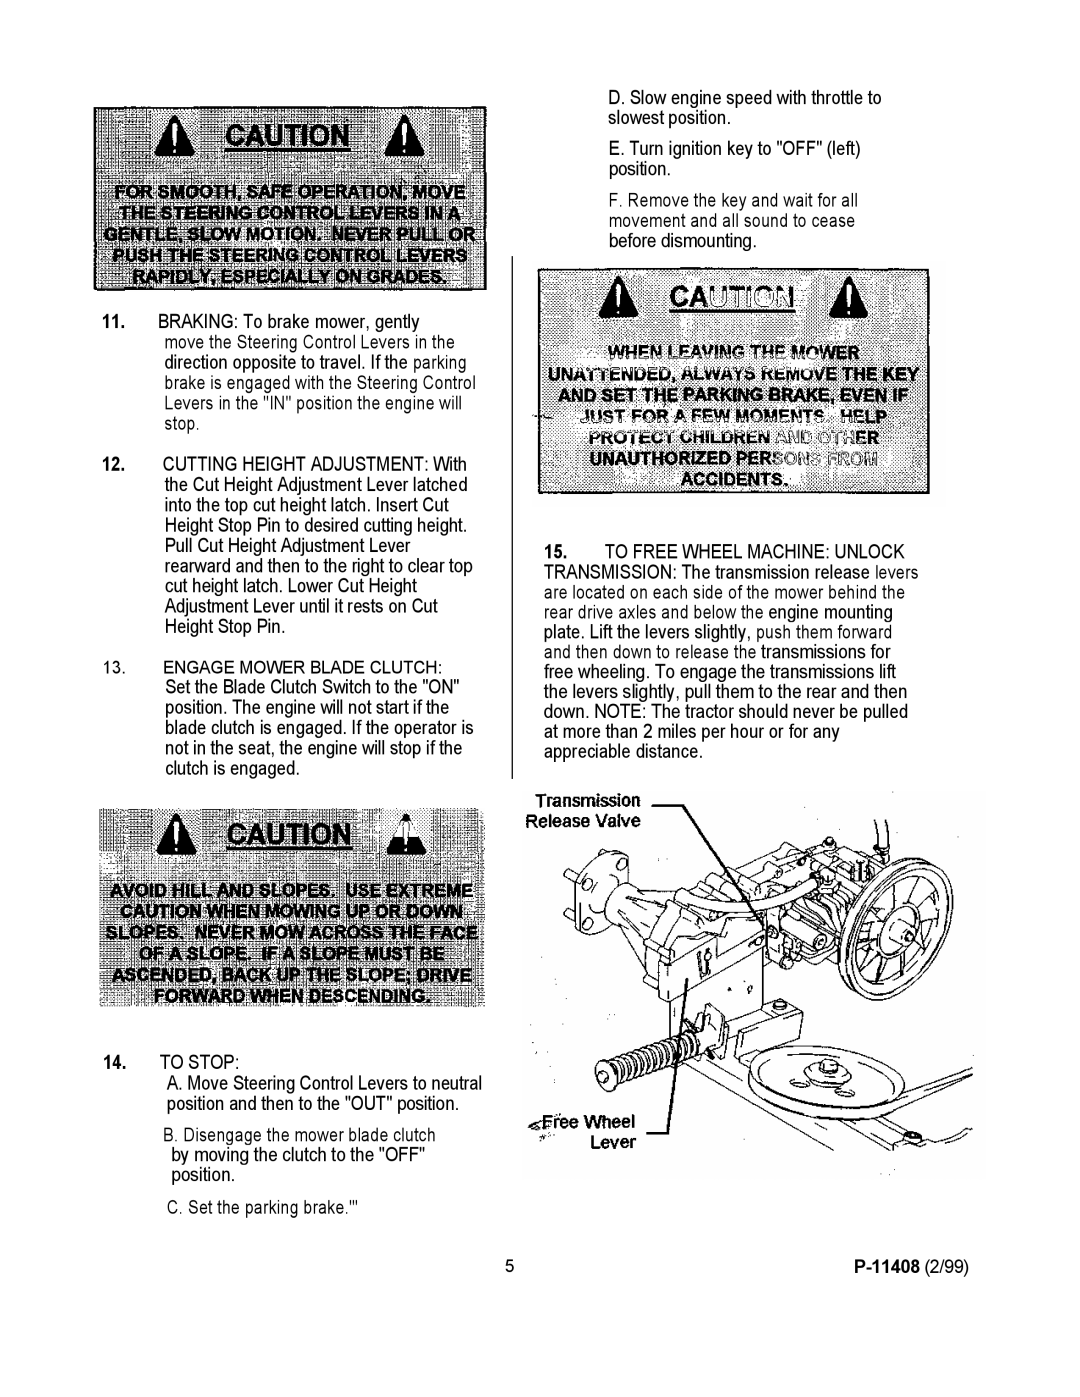 Dixon 700 Series manual To Stop, C. Set the parking brake, E. Turn ignition key to OFF left position 